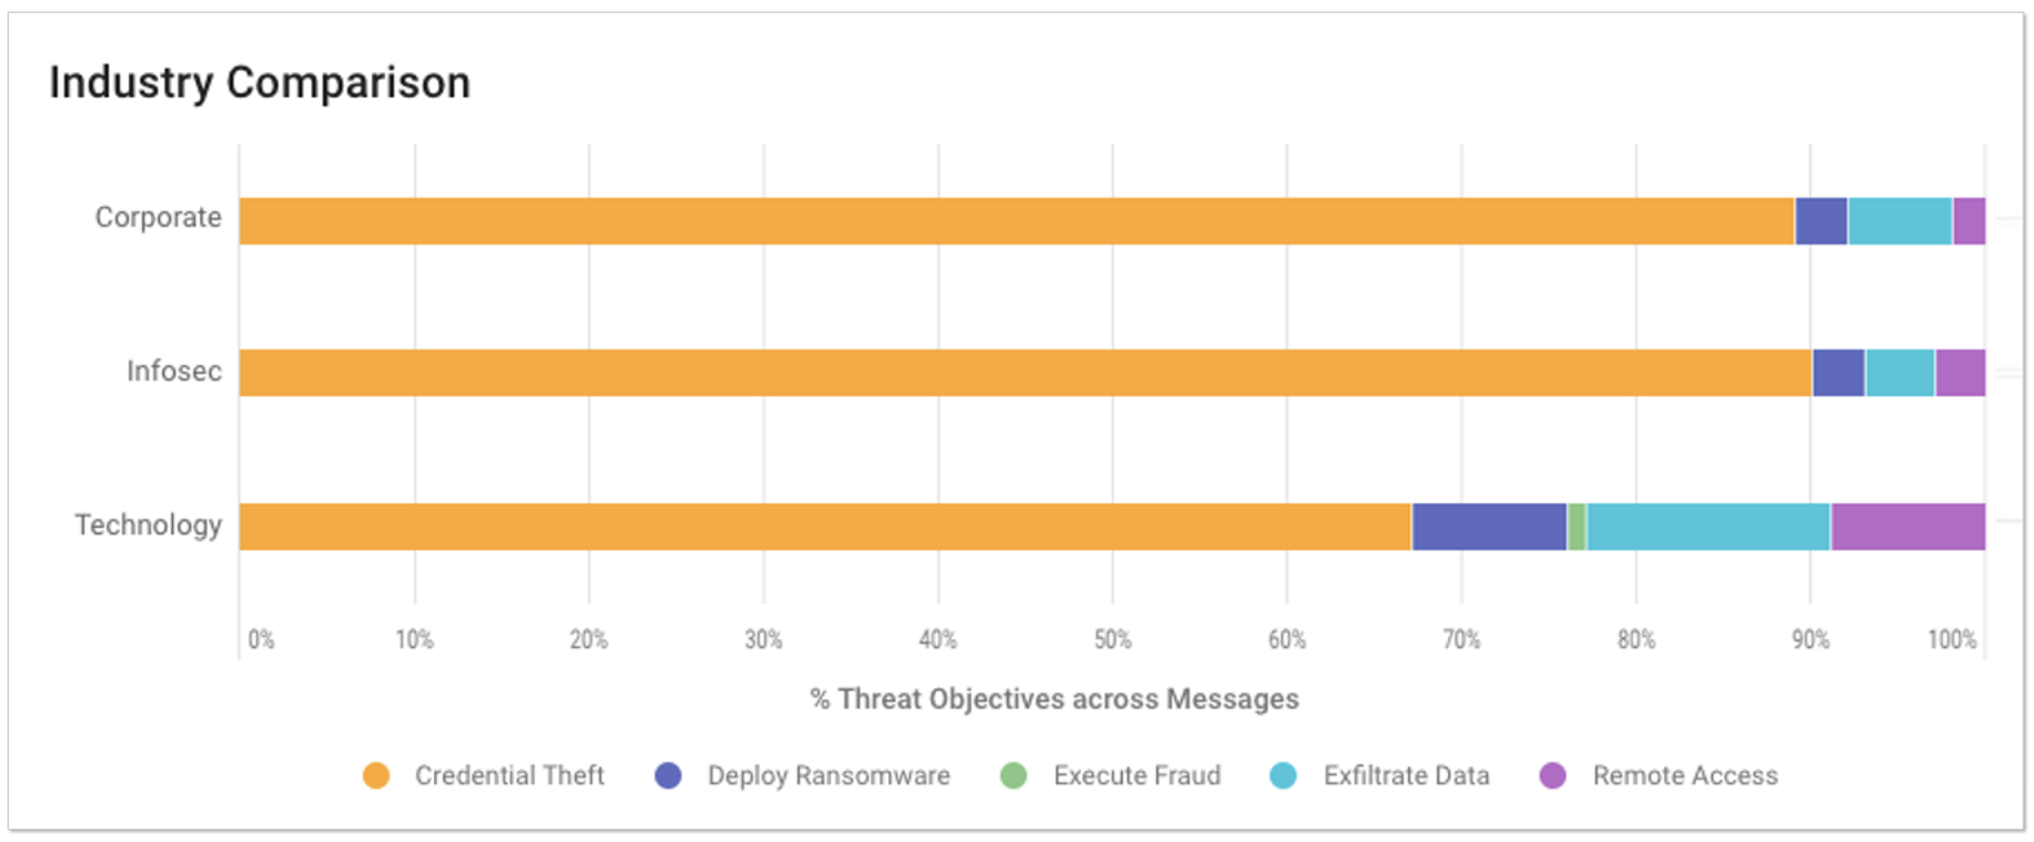 Industry Comparison Report Showing Percentage of Threat Objectives